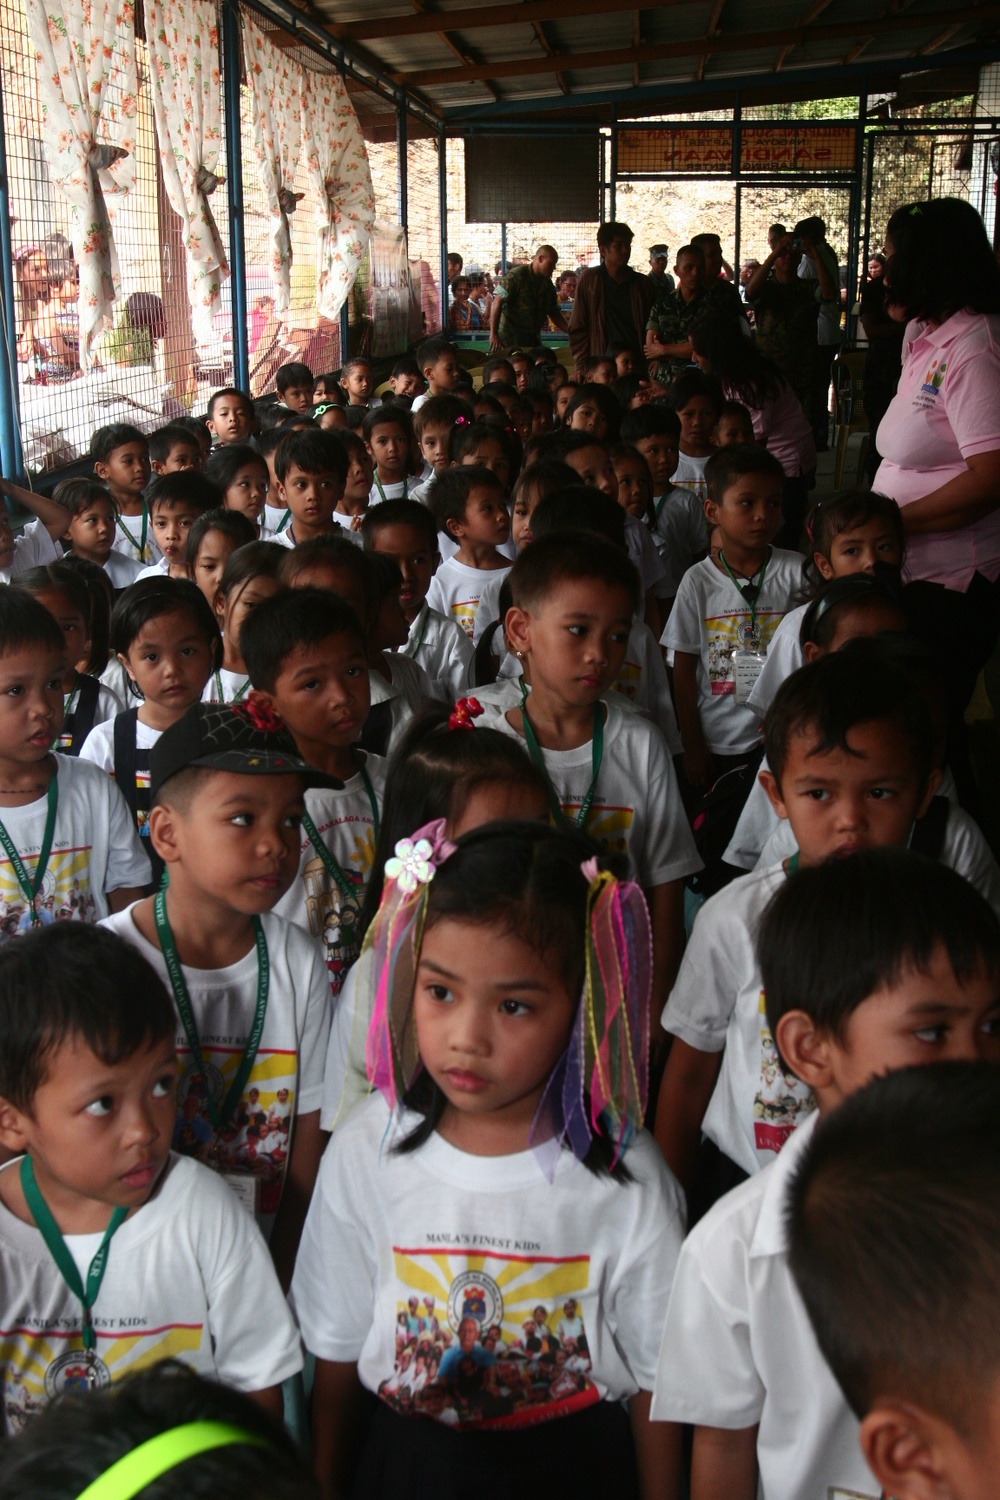 Operation Goodwill gives hope to children, families in the Philippines